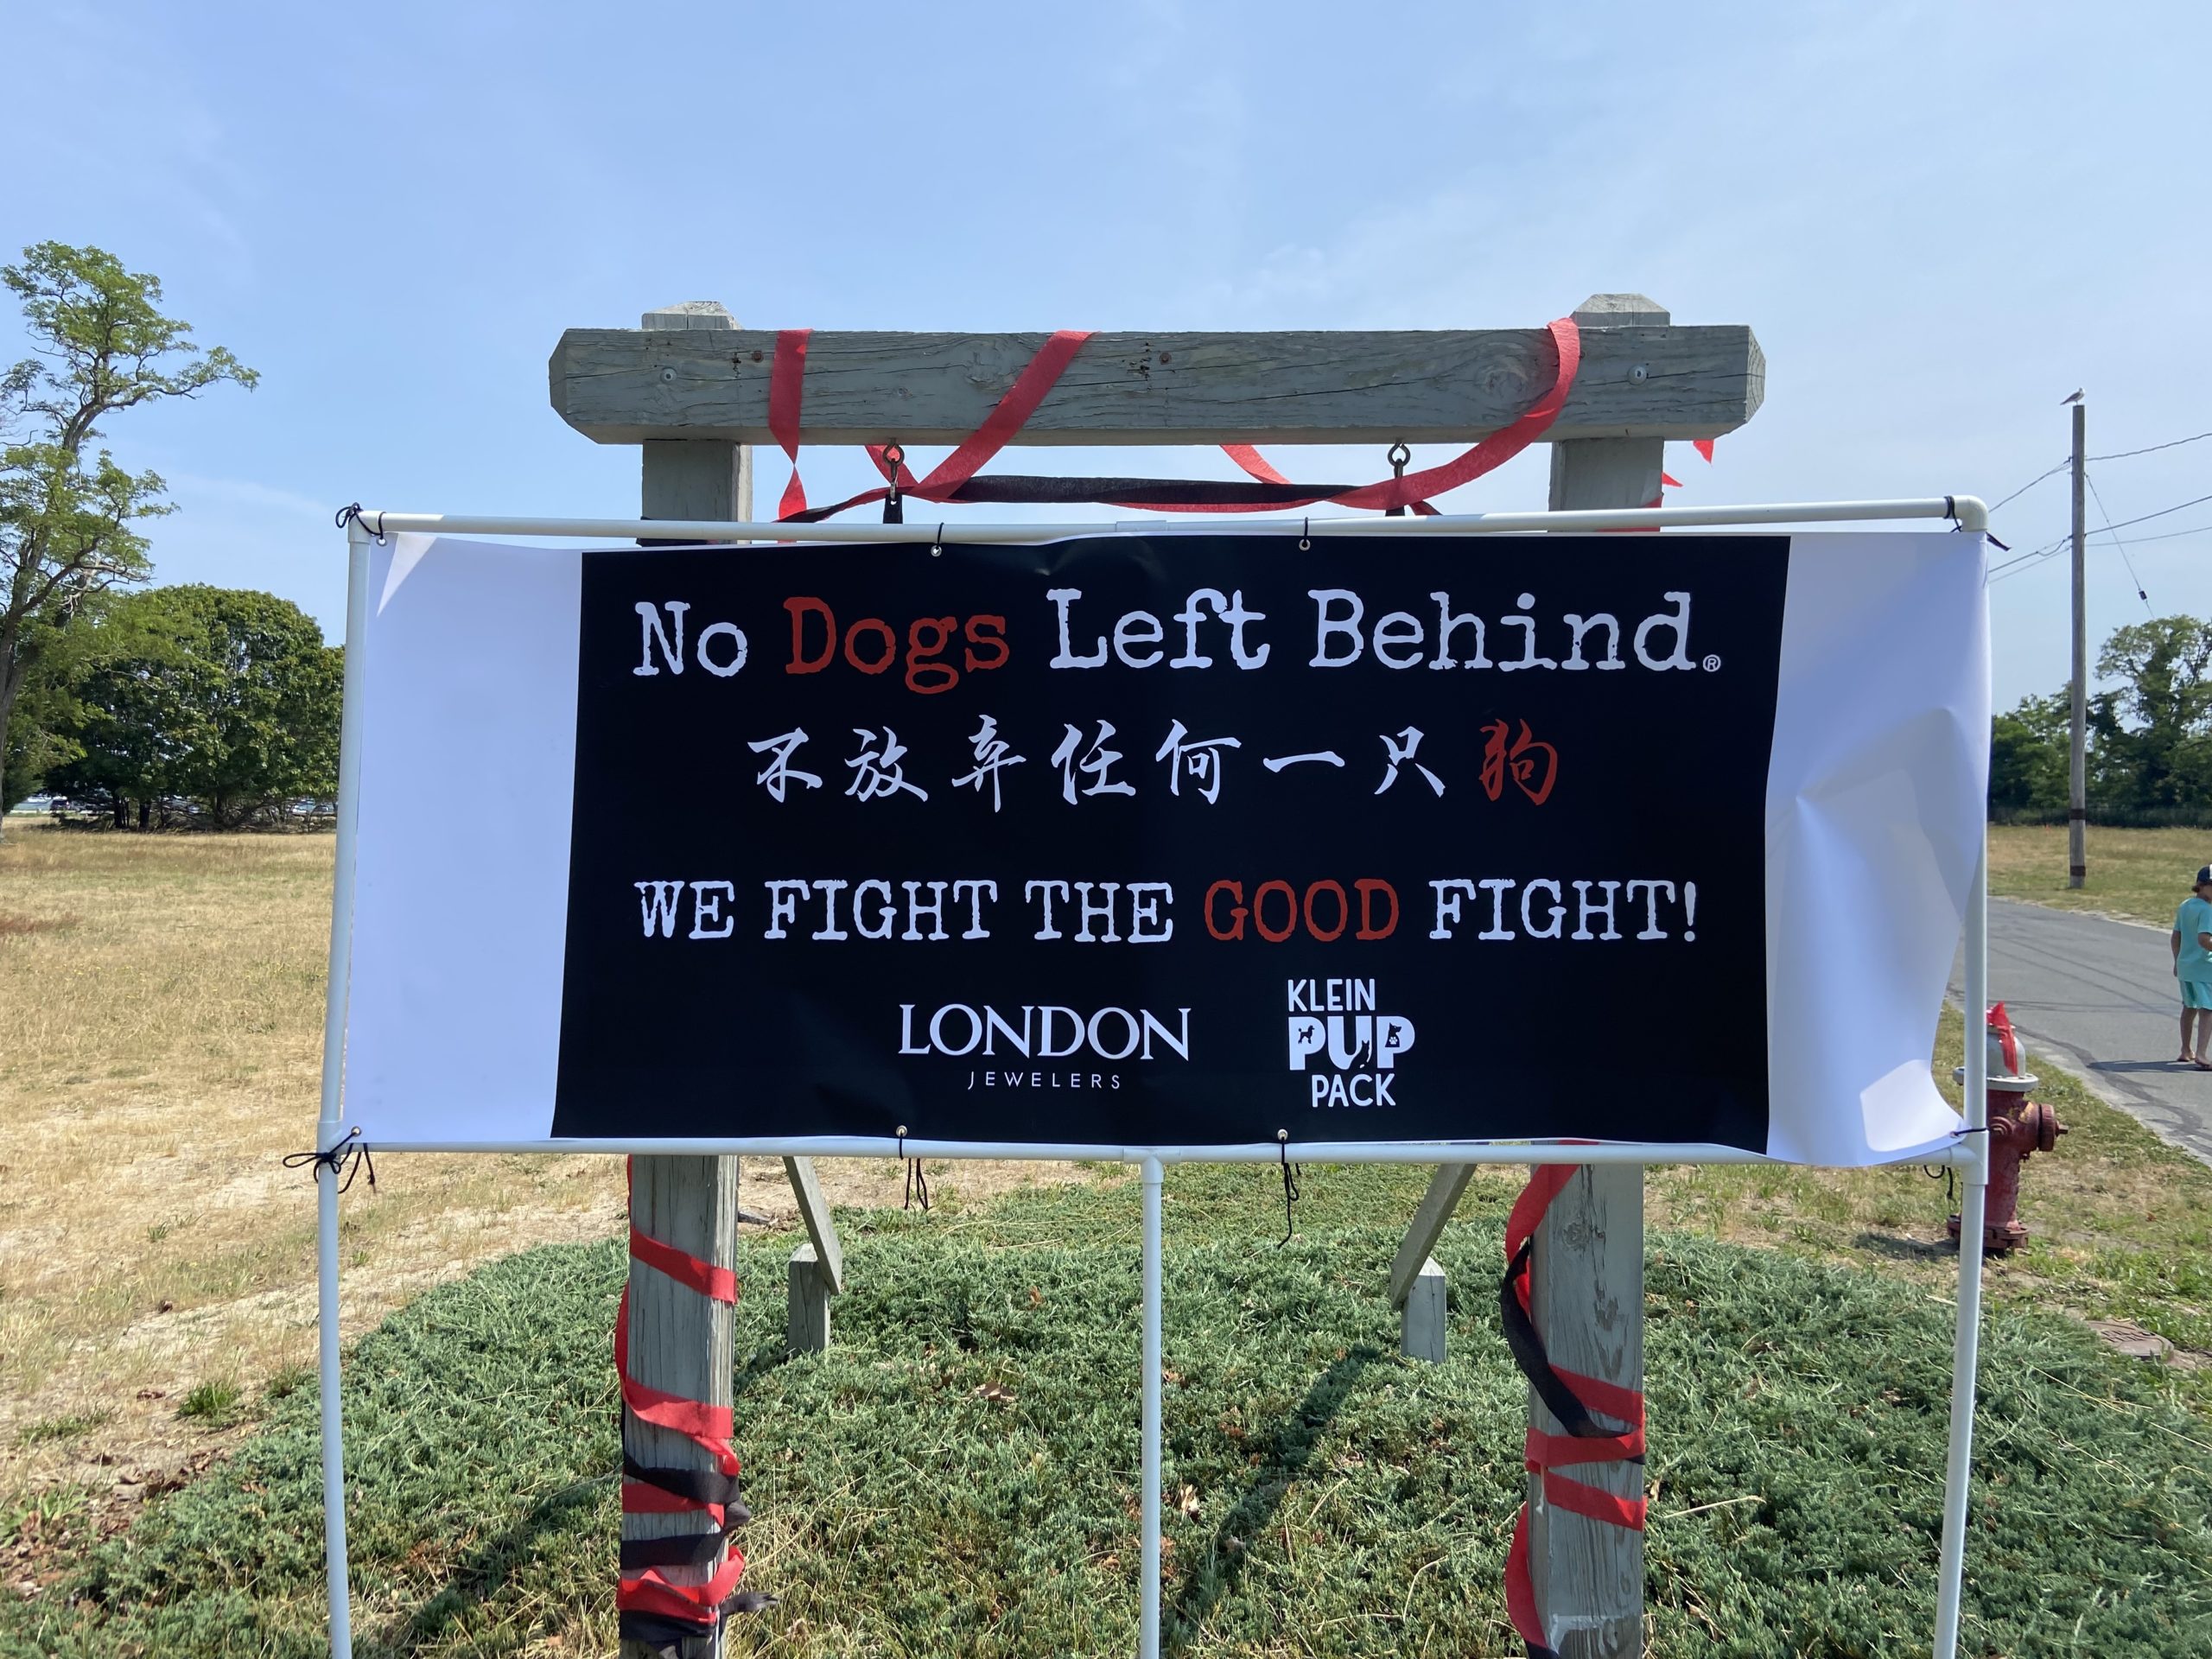 Nearly 100 people registered for Saturday's walk hosted by No Dogs Left Behind